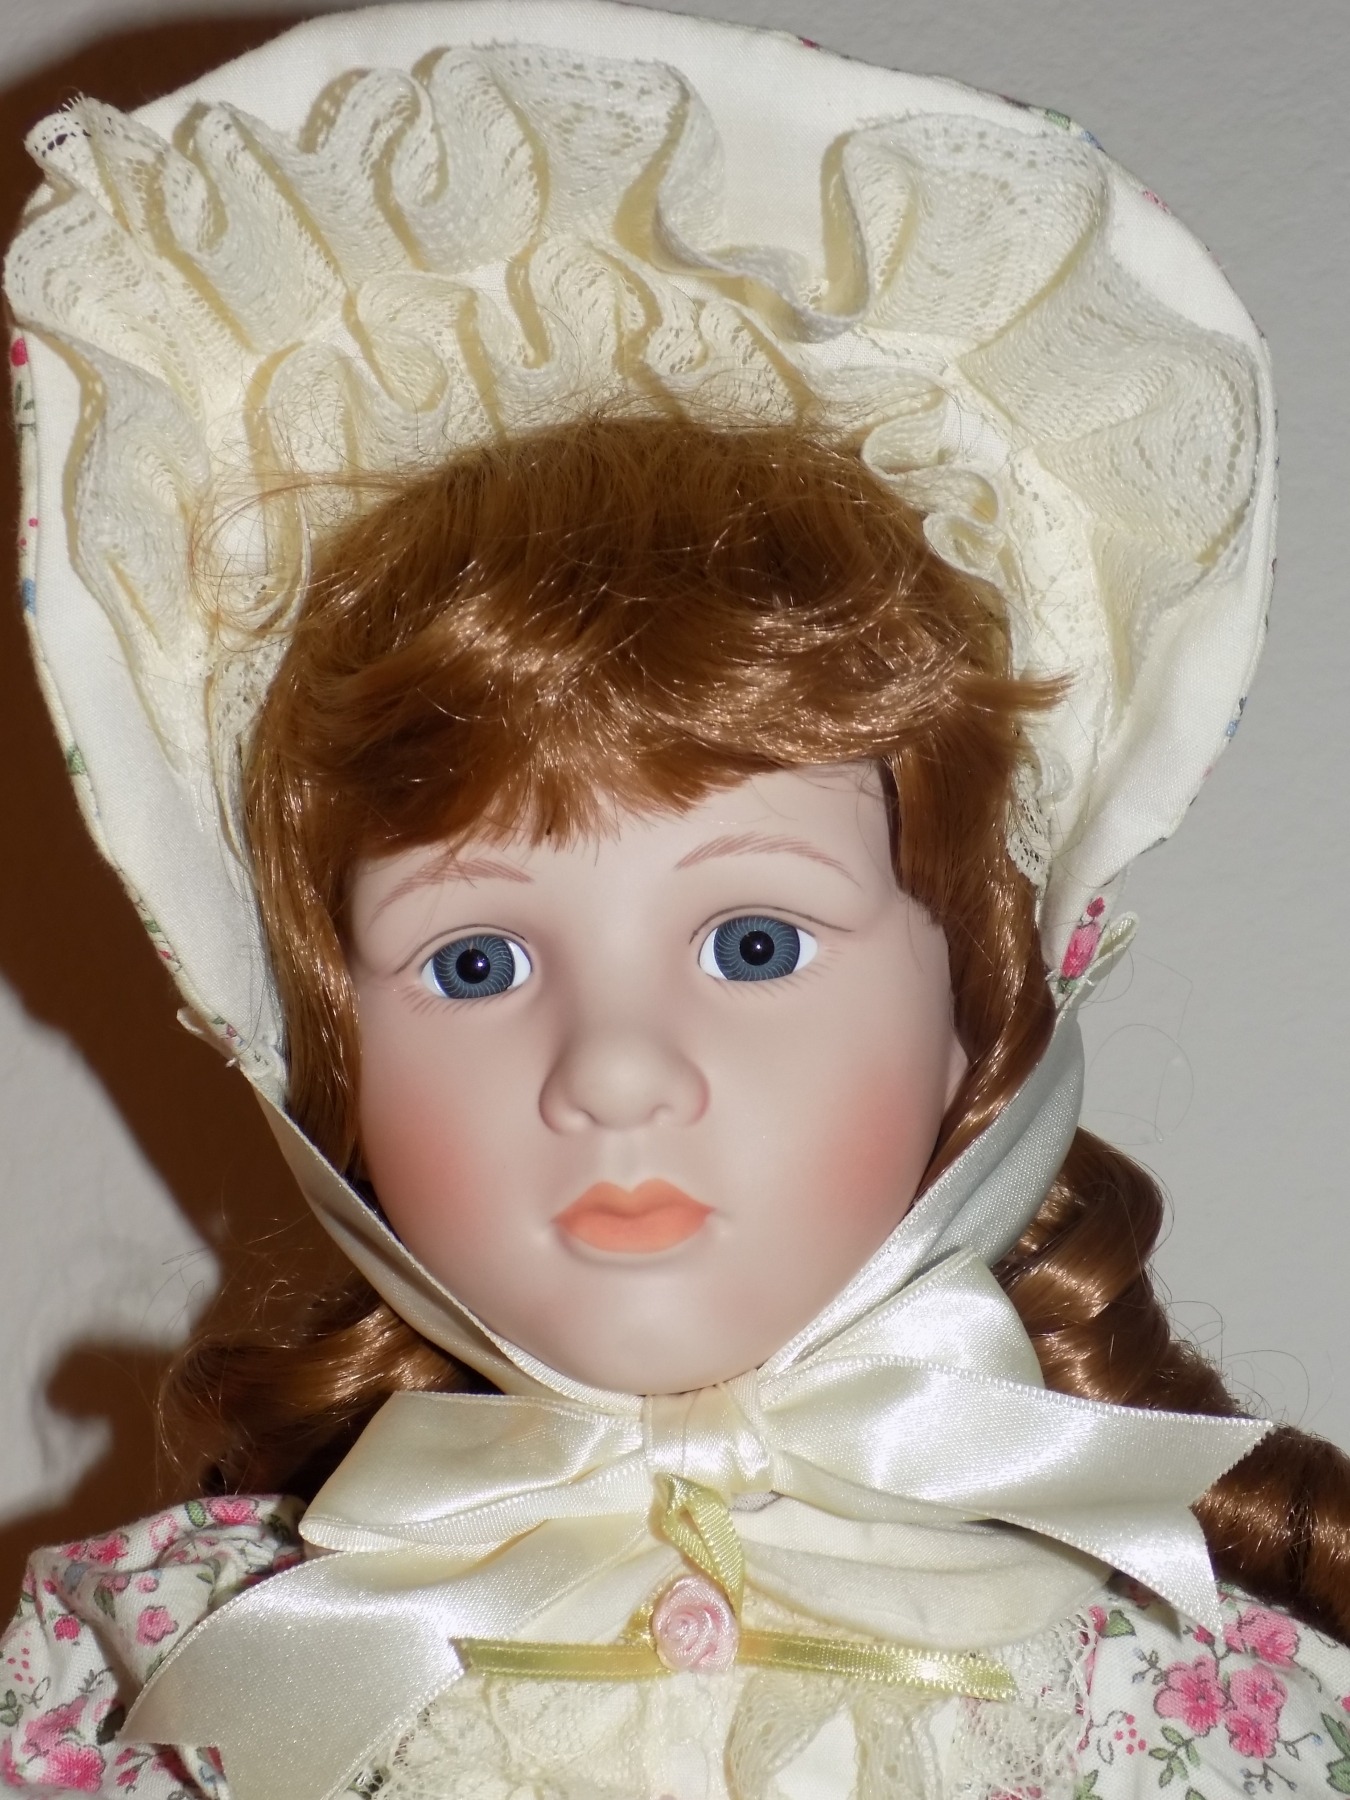 A sad Victorian doll with a frilly bonnet and curly hair.